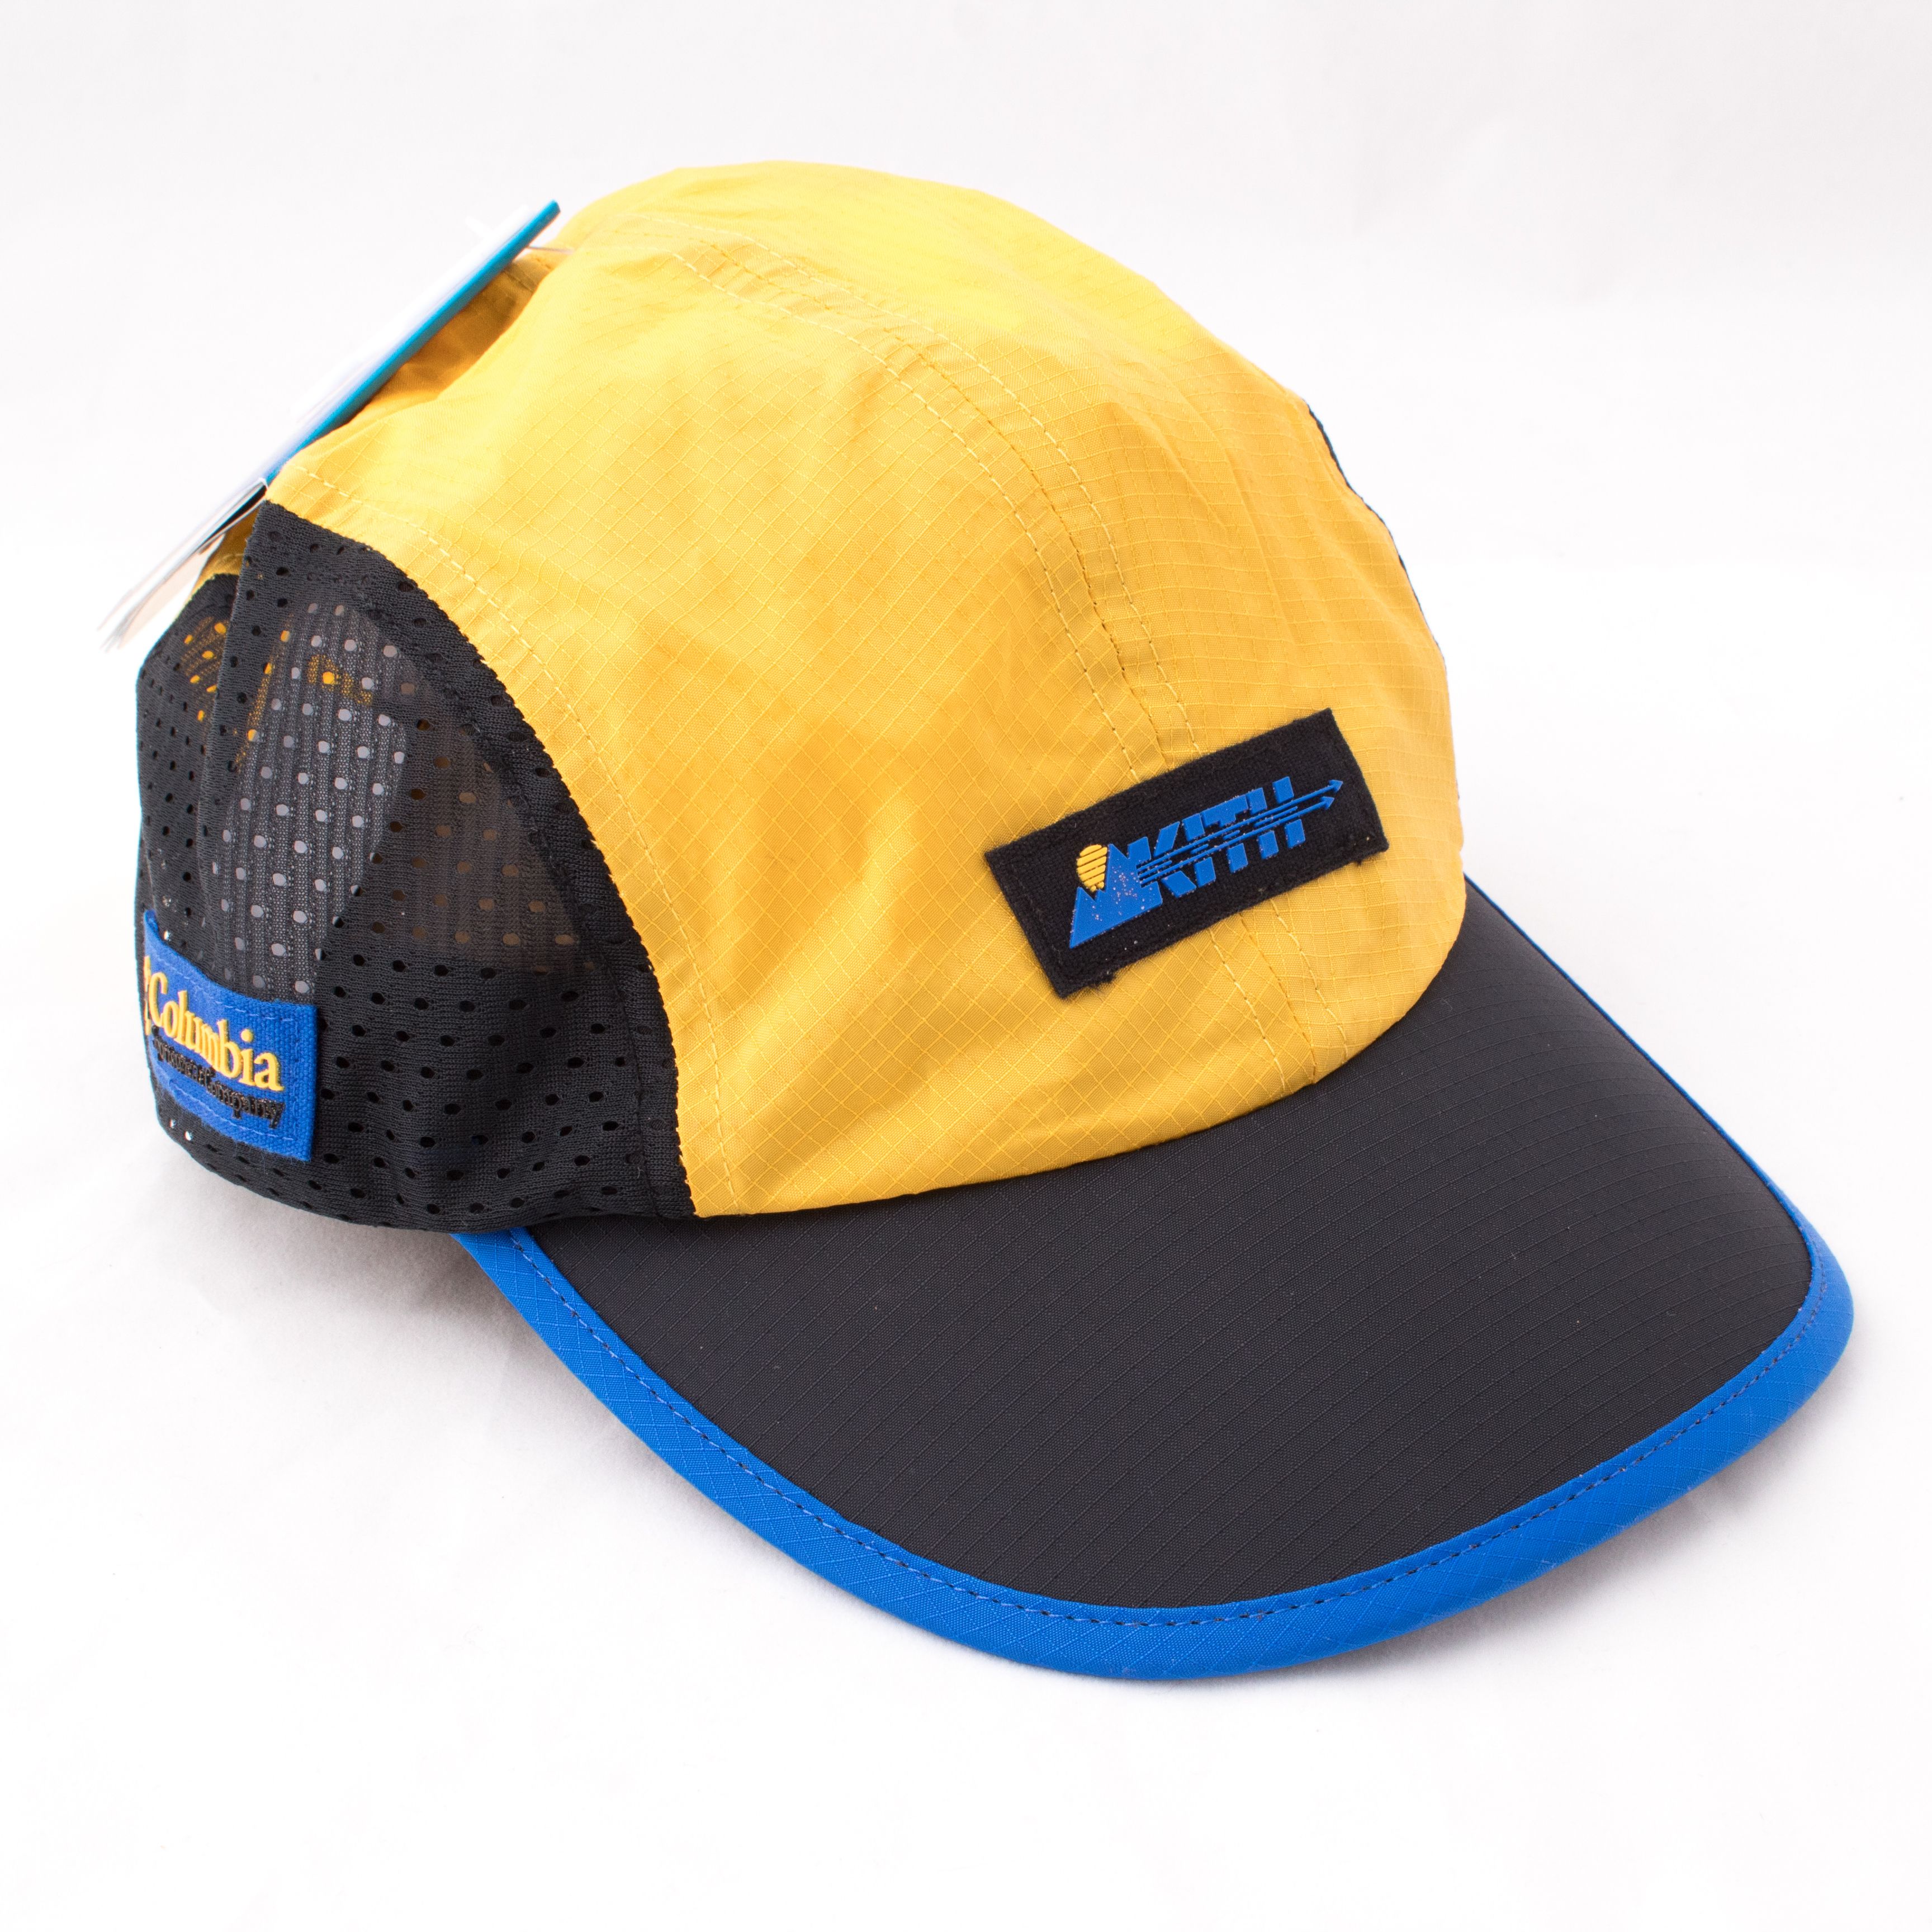 Kith x Columbia Shredder Cap by Seller Selects | Basic.Space